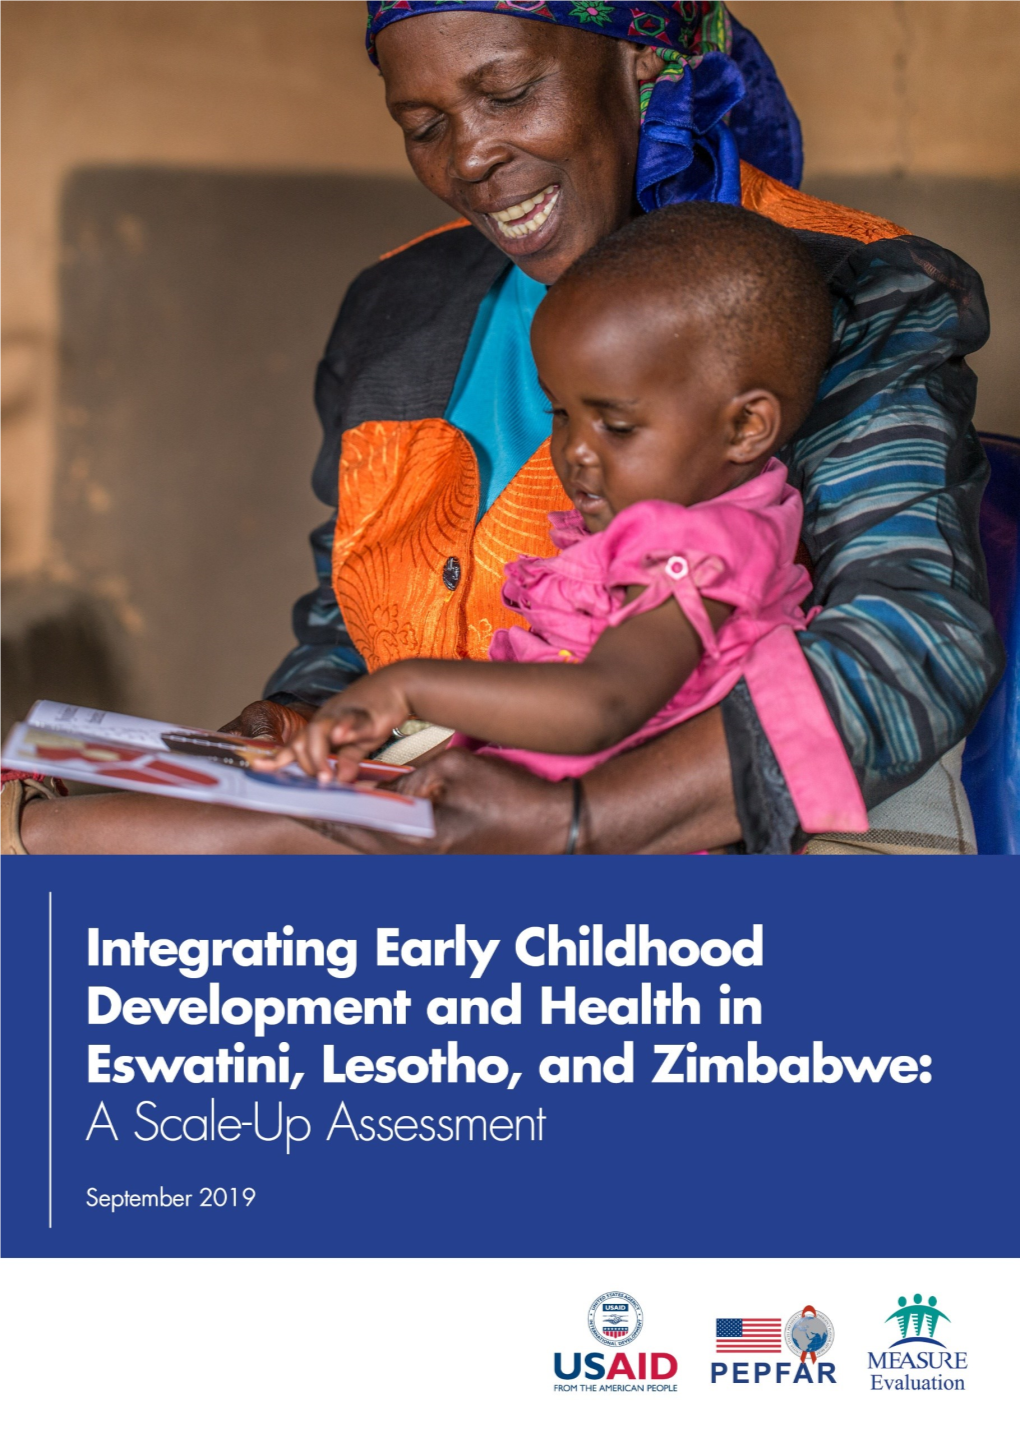 Integrating Early Childhood Development and Health in Eswatini, Lesotho, and Zimbabwe: a Scale-Up Assessment